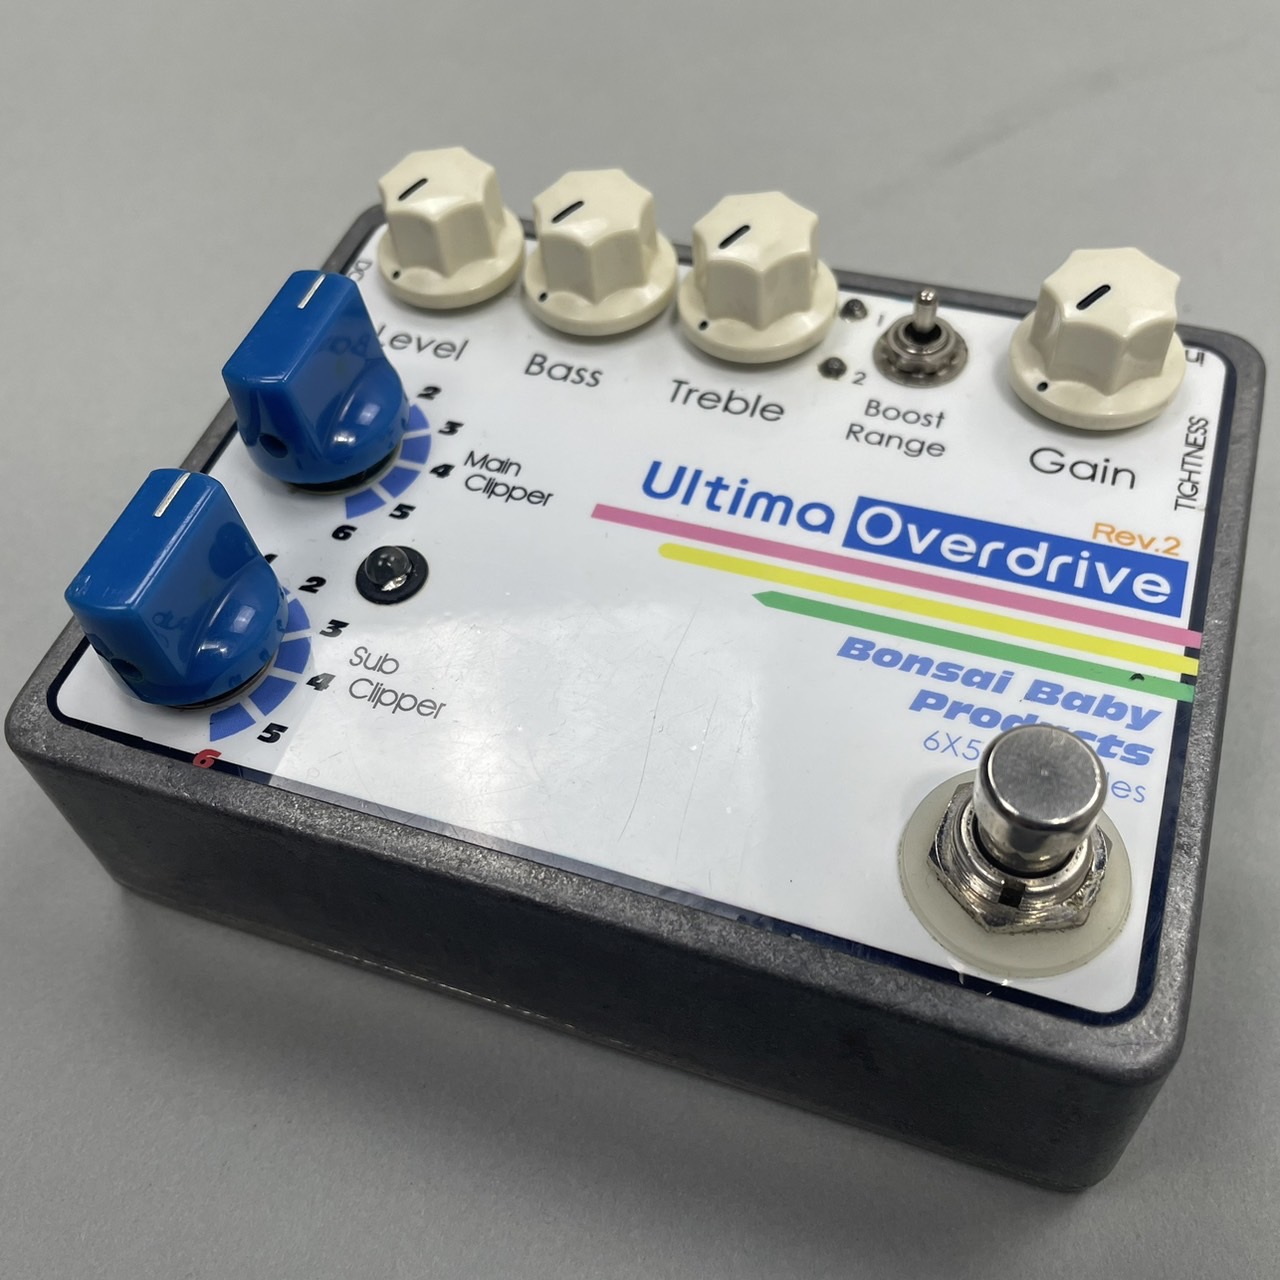 Bonsai Baby Products Ultima Overdrive - ギター